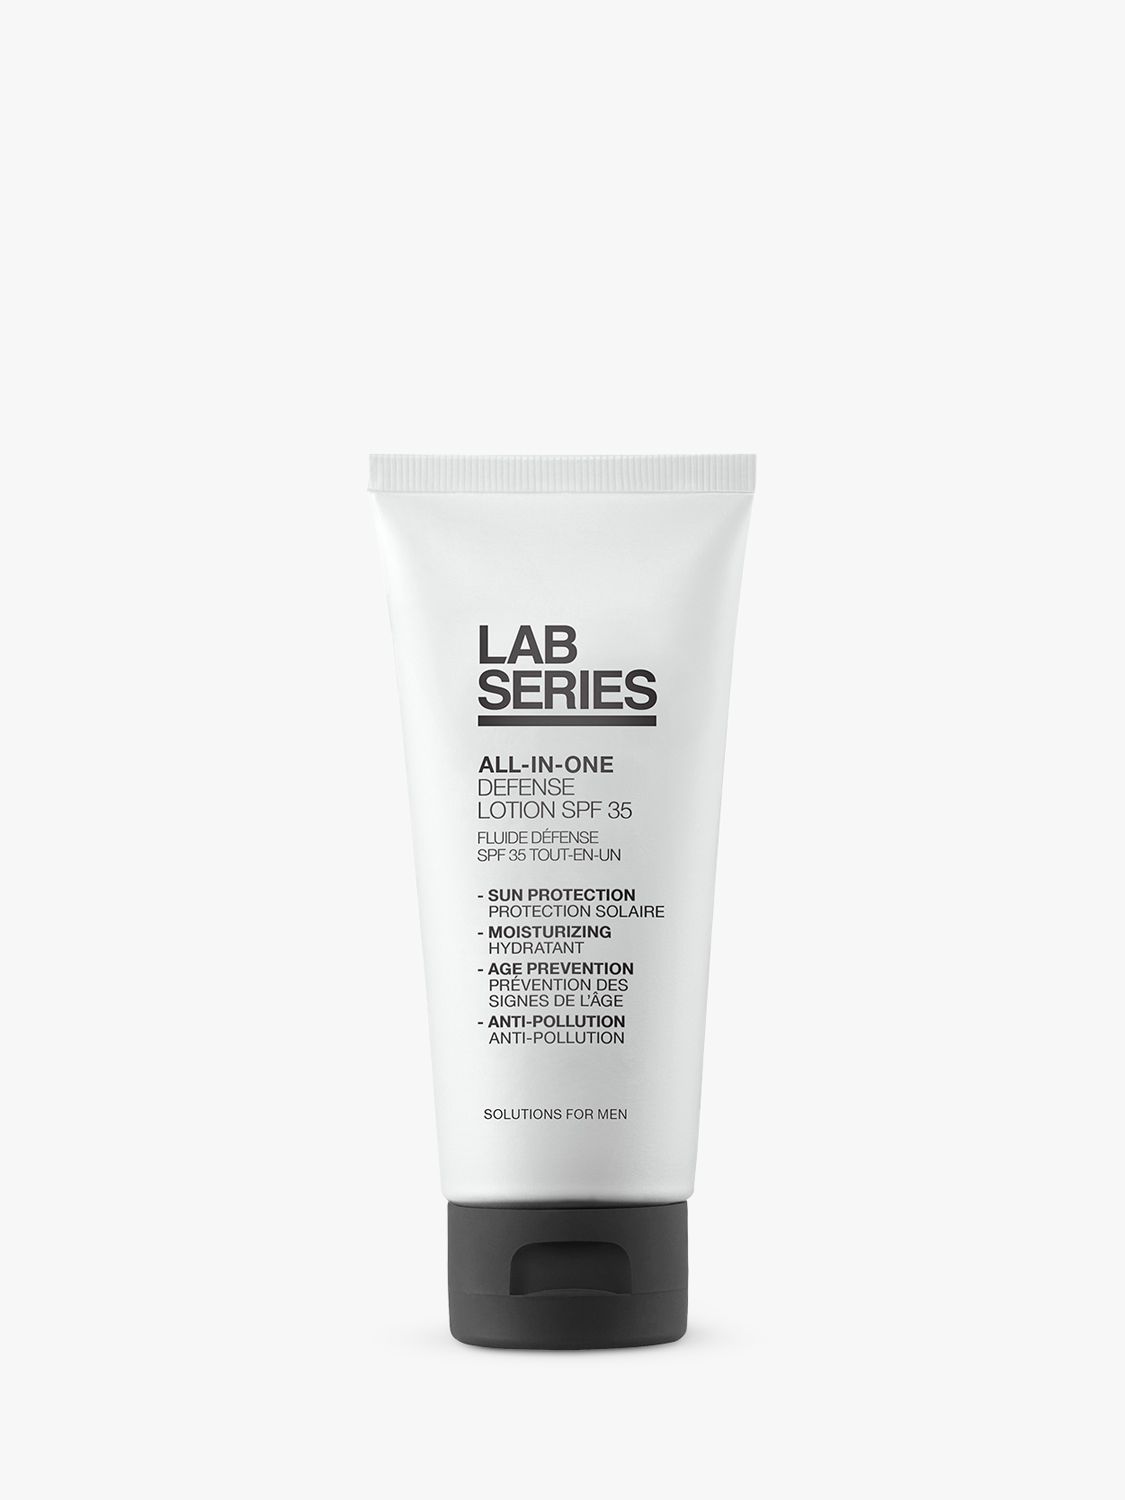 Lab Series All-In-One Defense Lotion SPF 35 PA++++, 100ml 1